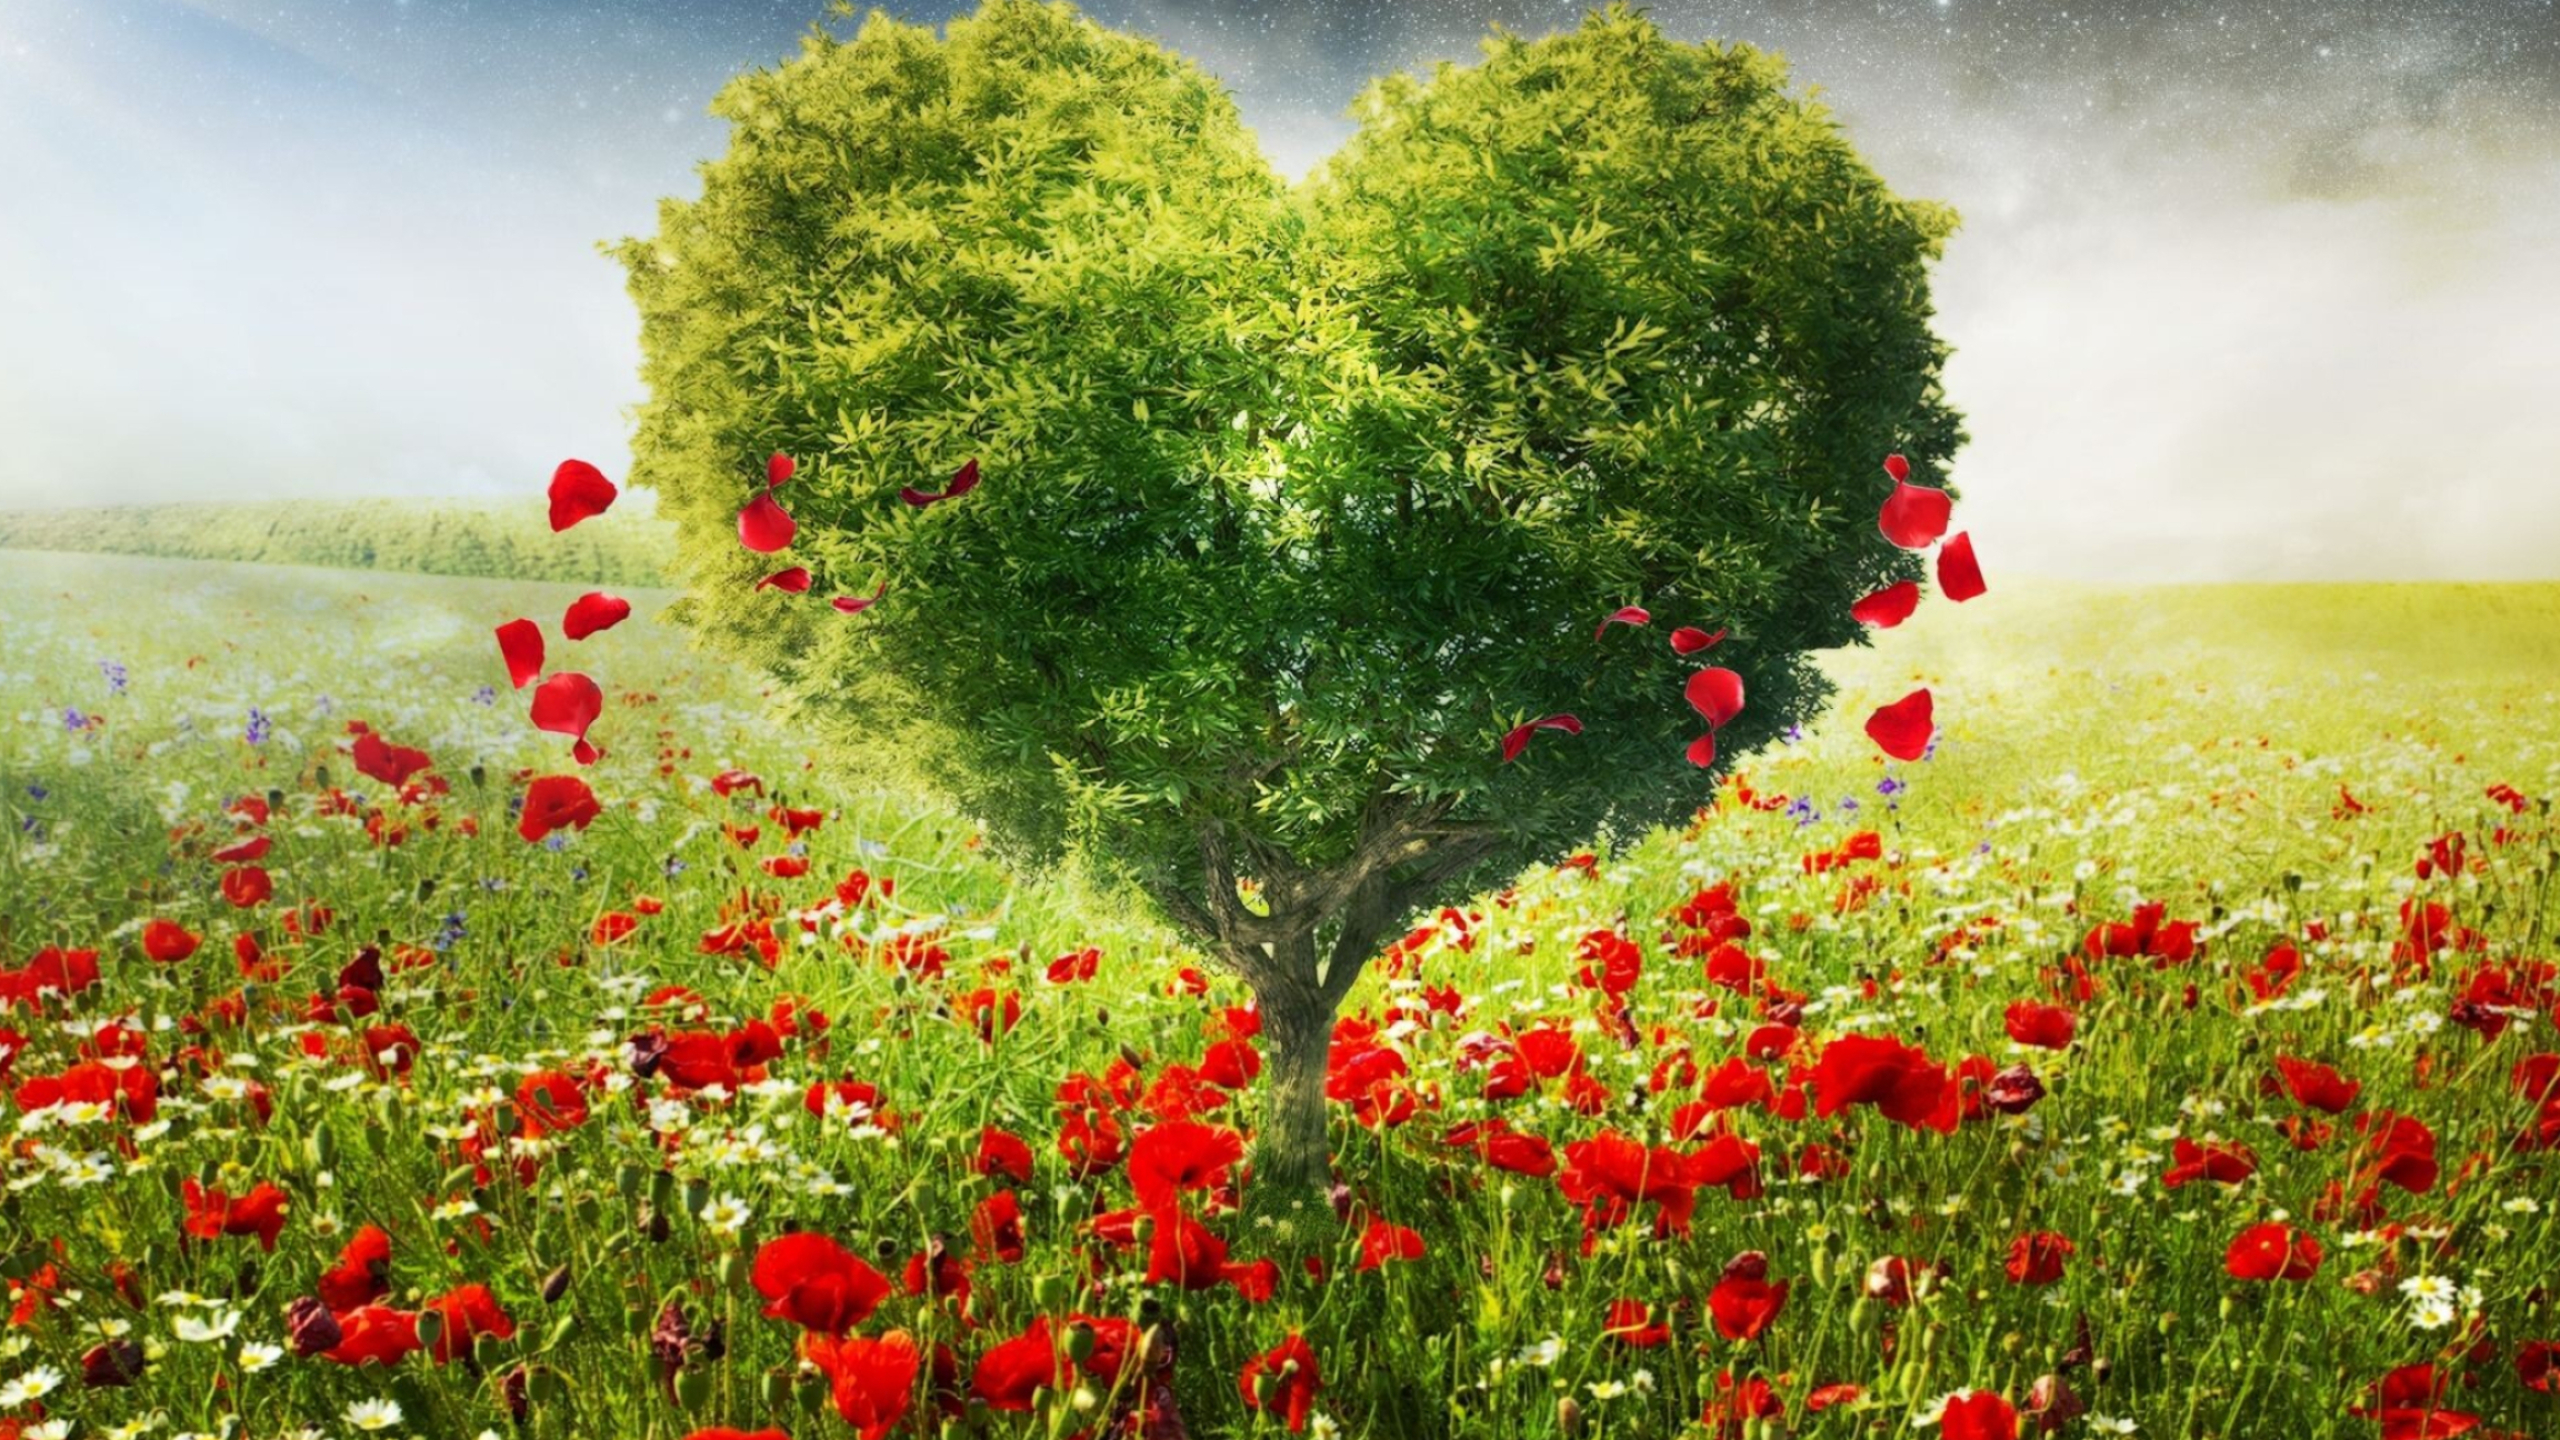 Go Green: Heart-shaped tree, The field of poppies, Beautiful nature, Untouched natural beauty. 2560x1440 HD Background.